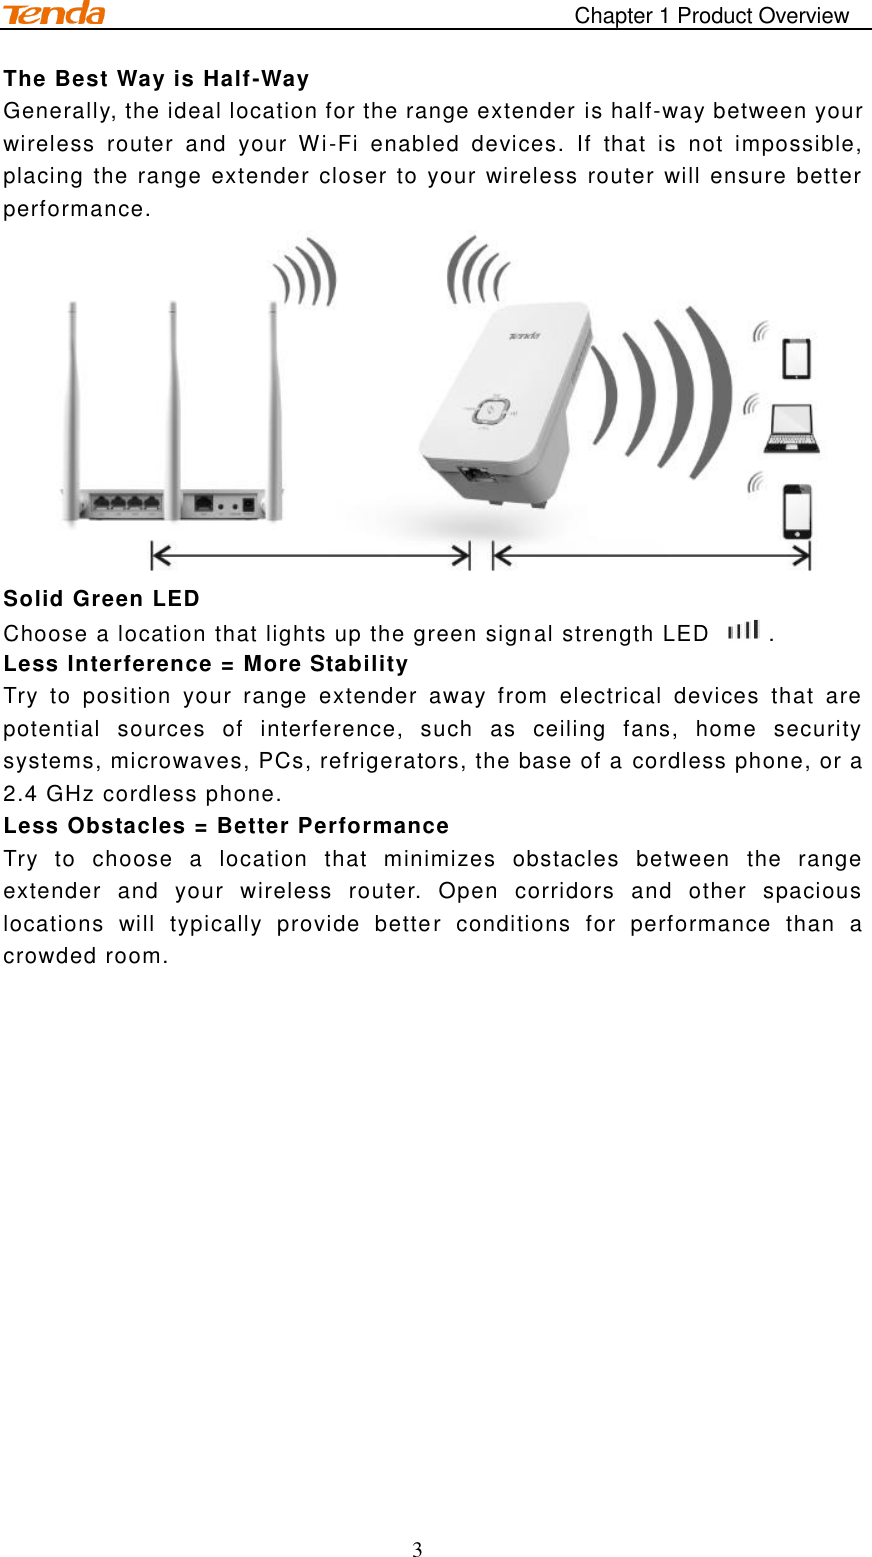                                                                                       Chapter 1 Product Overview 3 The Best Way is Half-Way Generally, the ideal location for the range extender is half-way between your wireless  router  and  your  Wi-Fi  enabled  devices.  If  that  is  not  impossible, placing the range extender closer to your wireless router will ensure better performance.  Solid Green LED Choose a location that lights up the green signal strength LED  .   Less Interference = More Stability   Try  to  position  your  range  extender  away  from  electrical  devices  that  are potential  sources  of  interference,  such  as  ceiling  fans,  home  security systems, microwaves, PCs, refrigerators, the base of a cordless phone, or a 2.4 GHz cordless phone. Less Obstacles = Better Performance Try  to  choose  a  location  that  minimizes  obstacles  between  the  range extender  and  your  wireless  router.  Open  corridors  and  other  spacious locations  will  typically  provide  better  conditions  for  performance  than  a crowded room.   